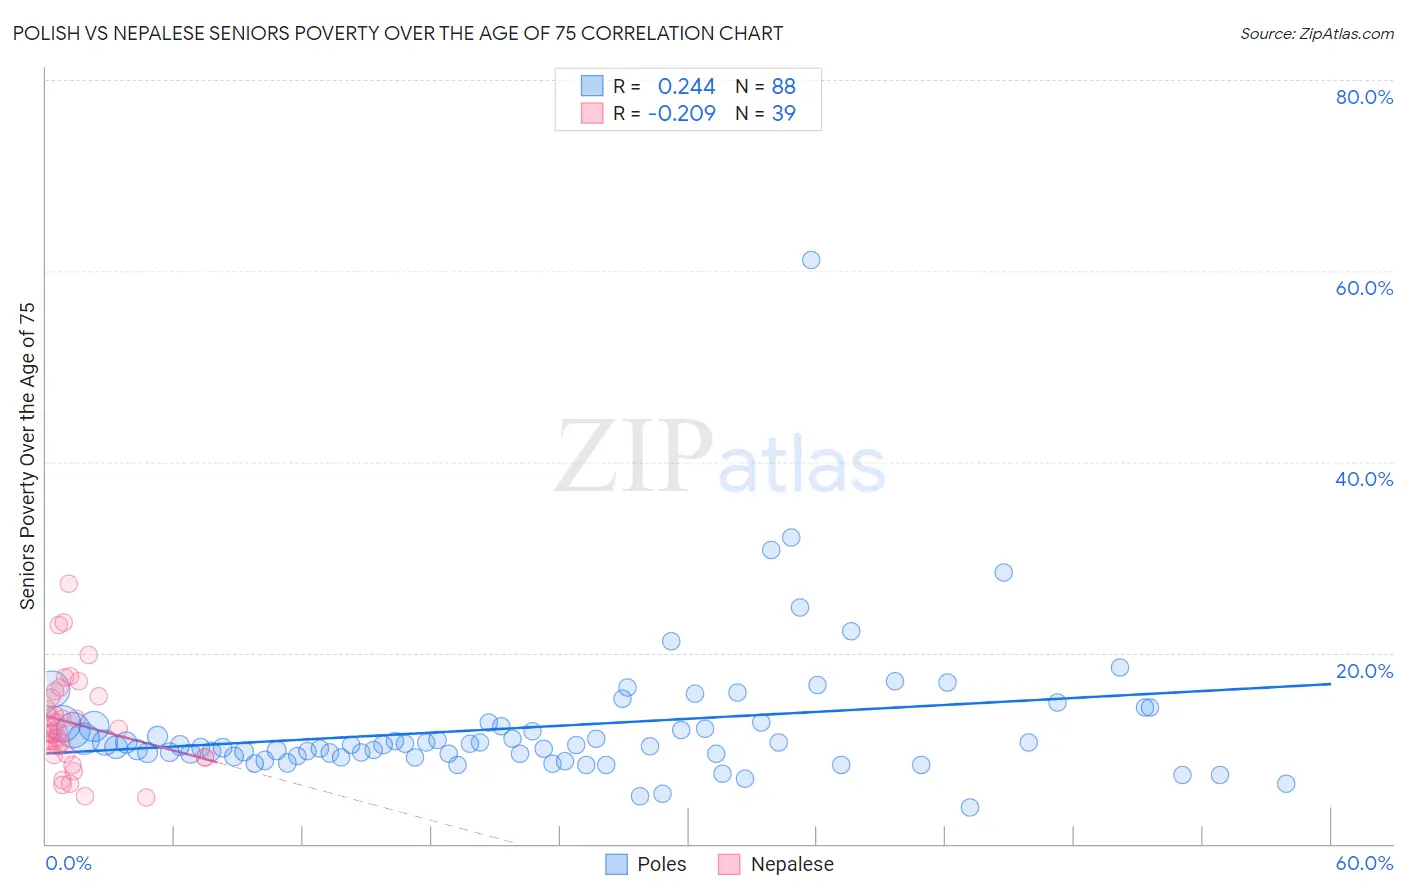 Polish vs Nepalese Seniors Poverty Over the Age of 75